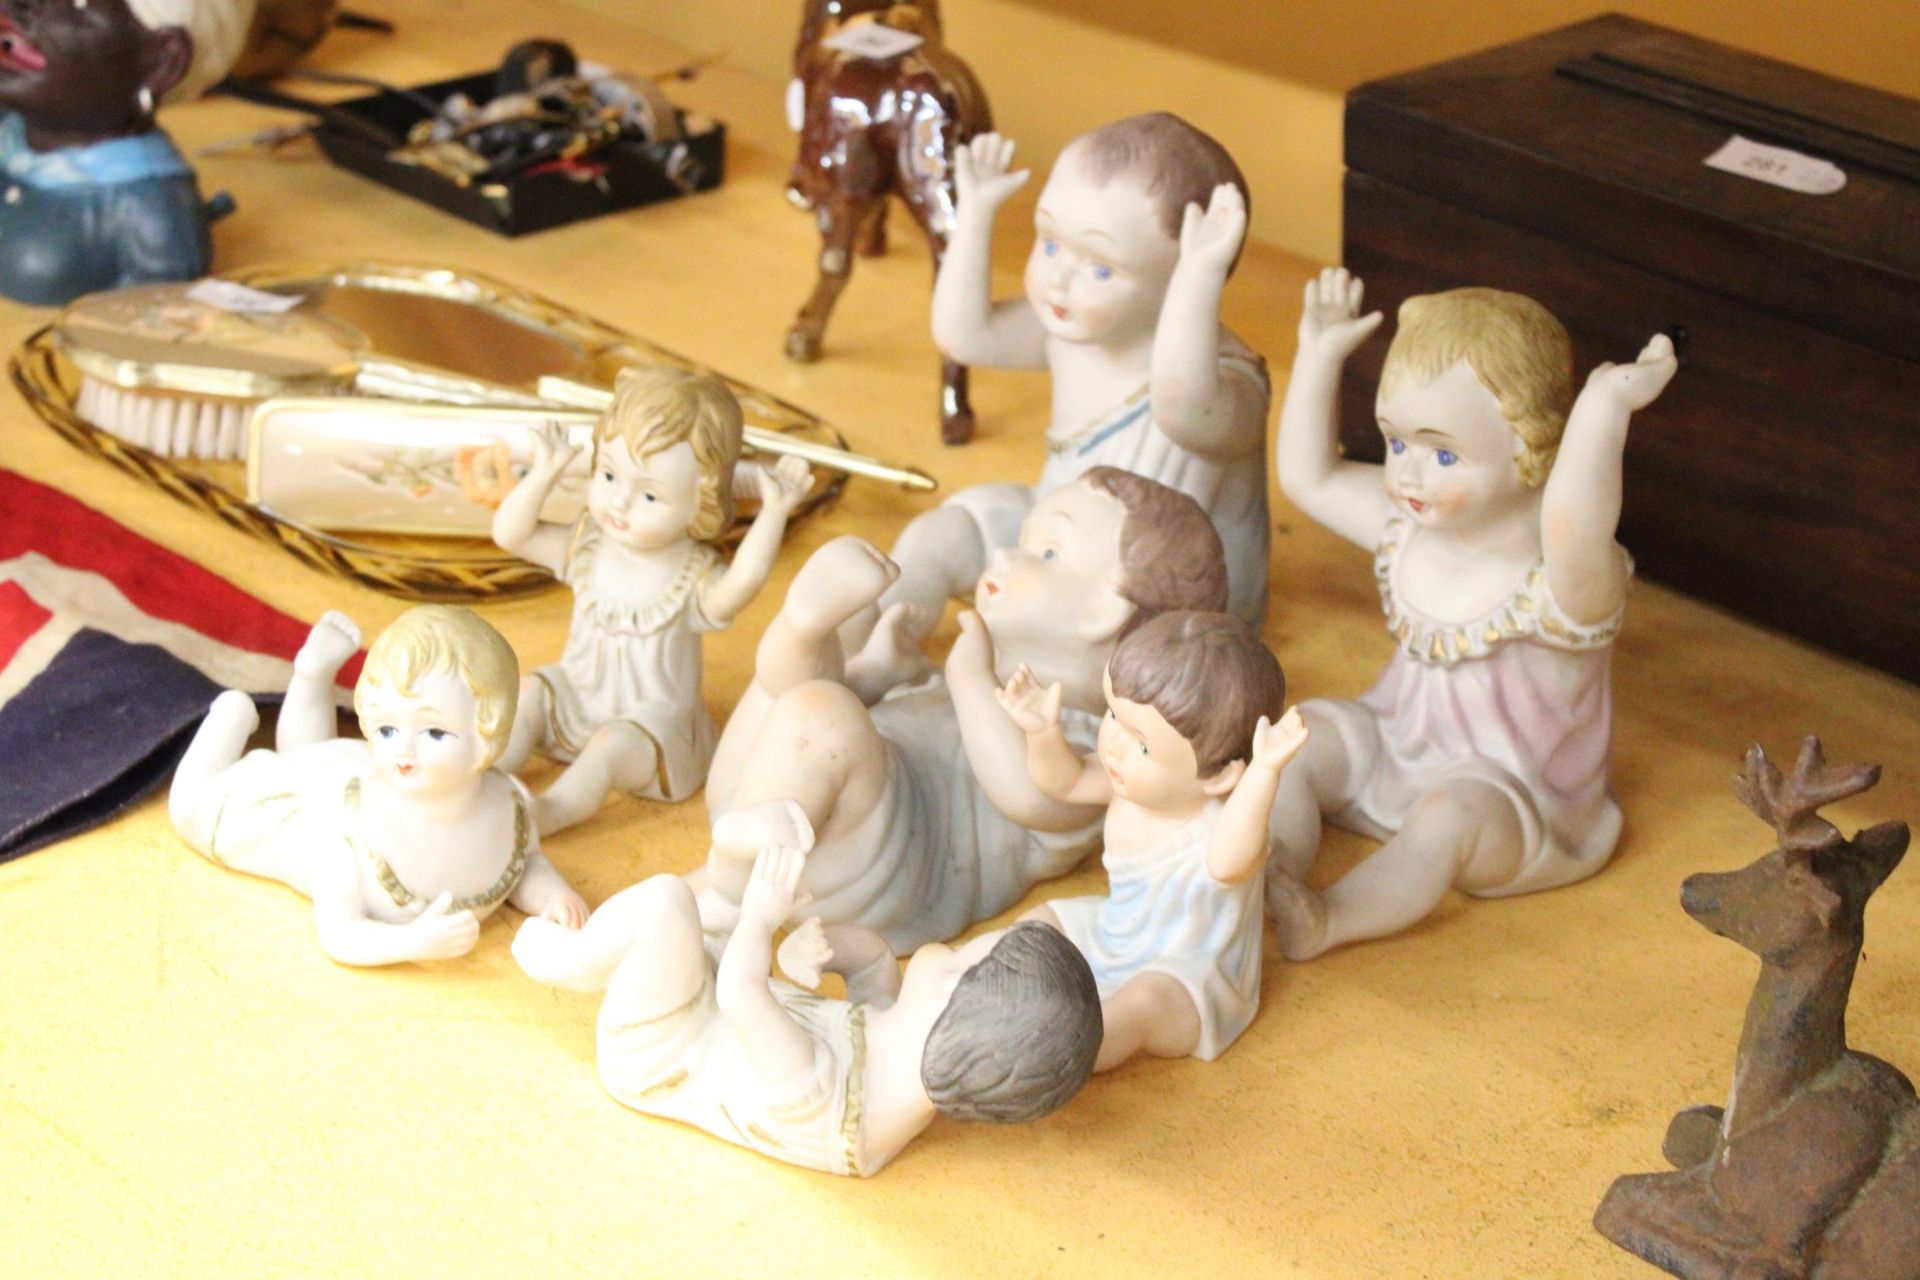 THREE LARGE AND FOUR SMALL ANTIQUE PORCELAIN, BISQUE DOLLS - Image 5 of 5